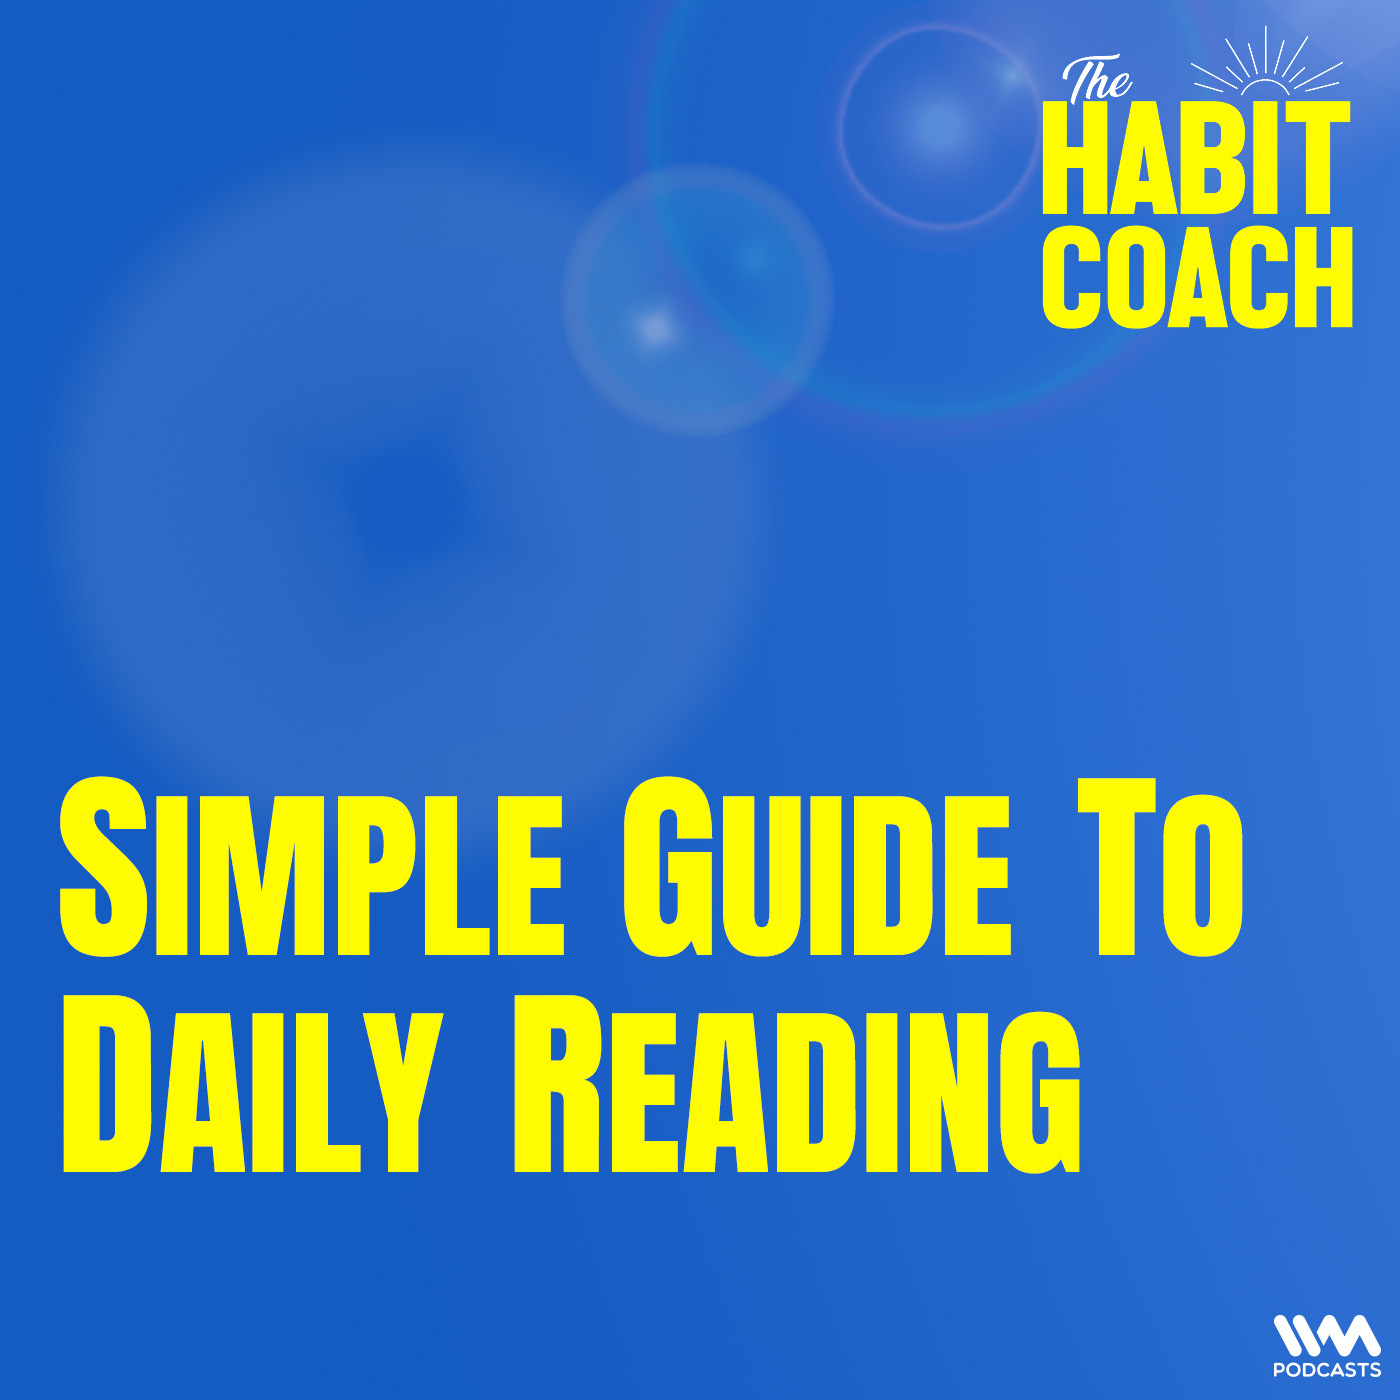 Simple Guide to Daily Reading